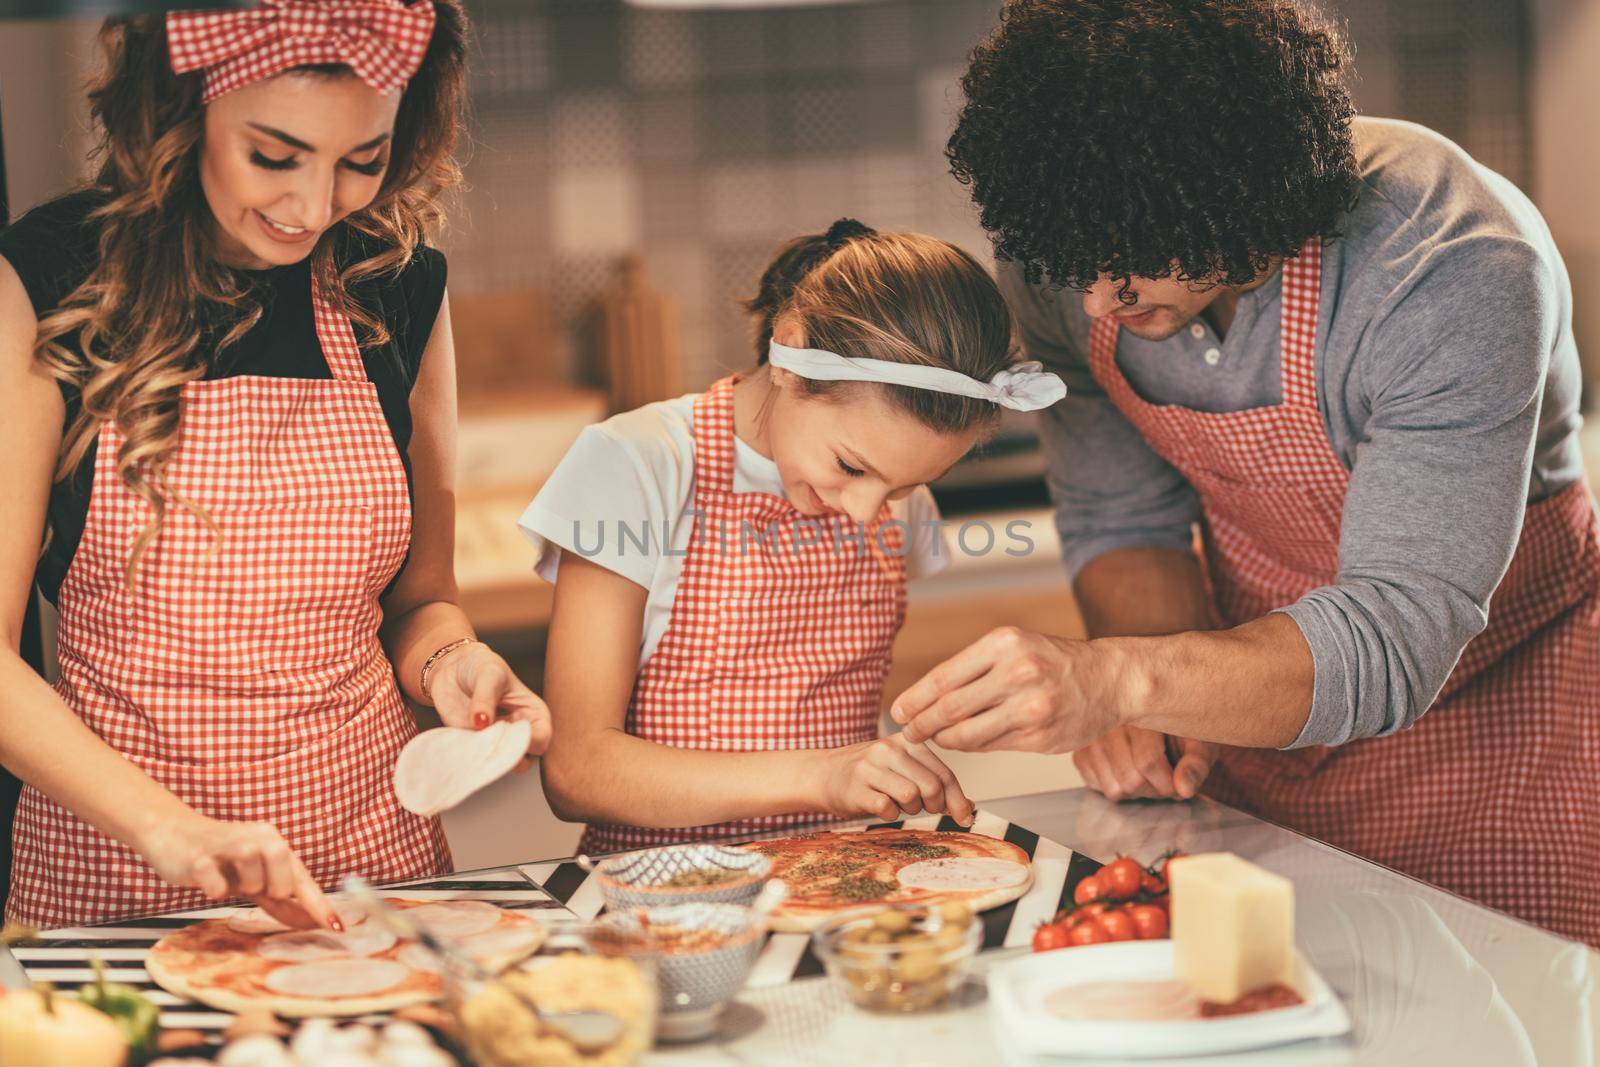 Happy parents and their daughter are preparing meal together in the kitchen. Little girl and her father are putting ketchup and oregano on the pizza.